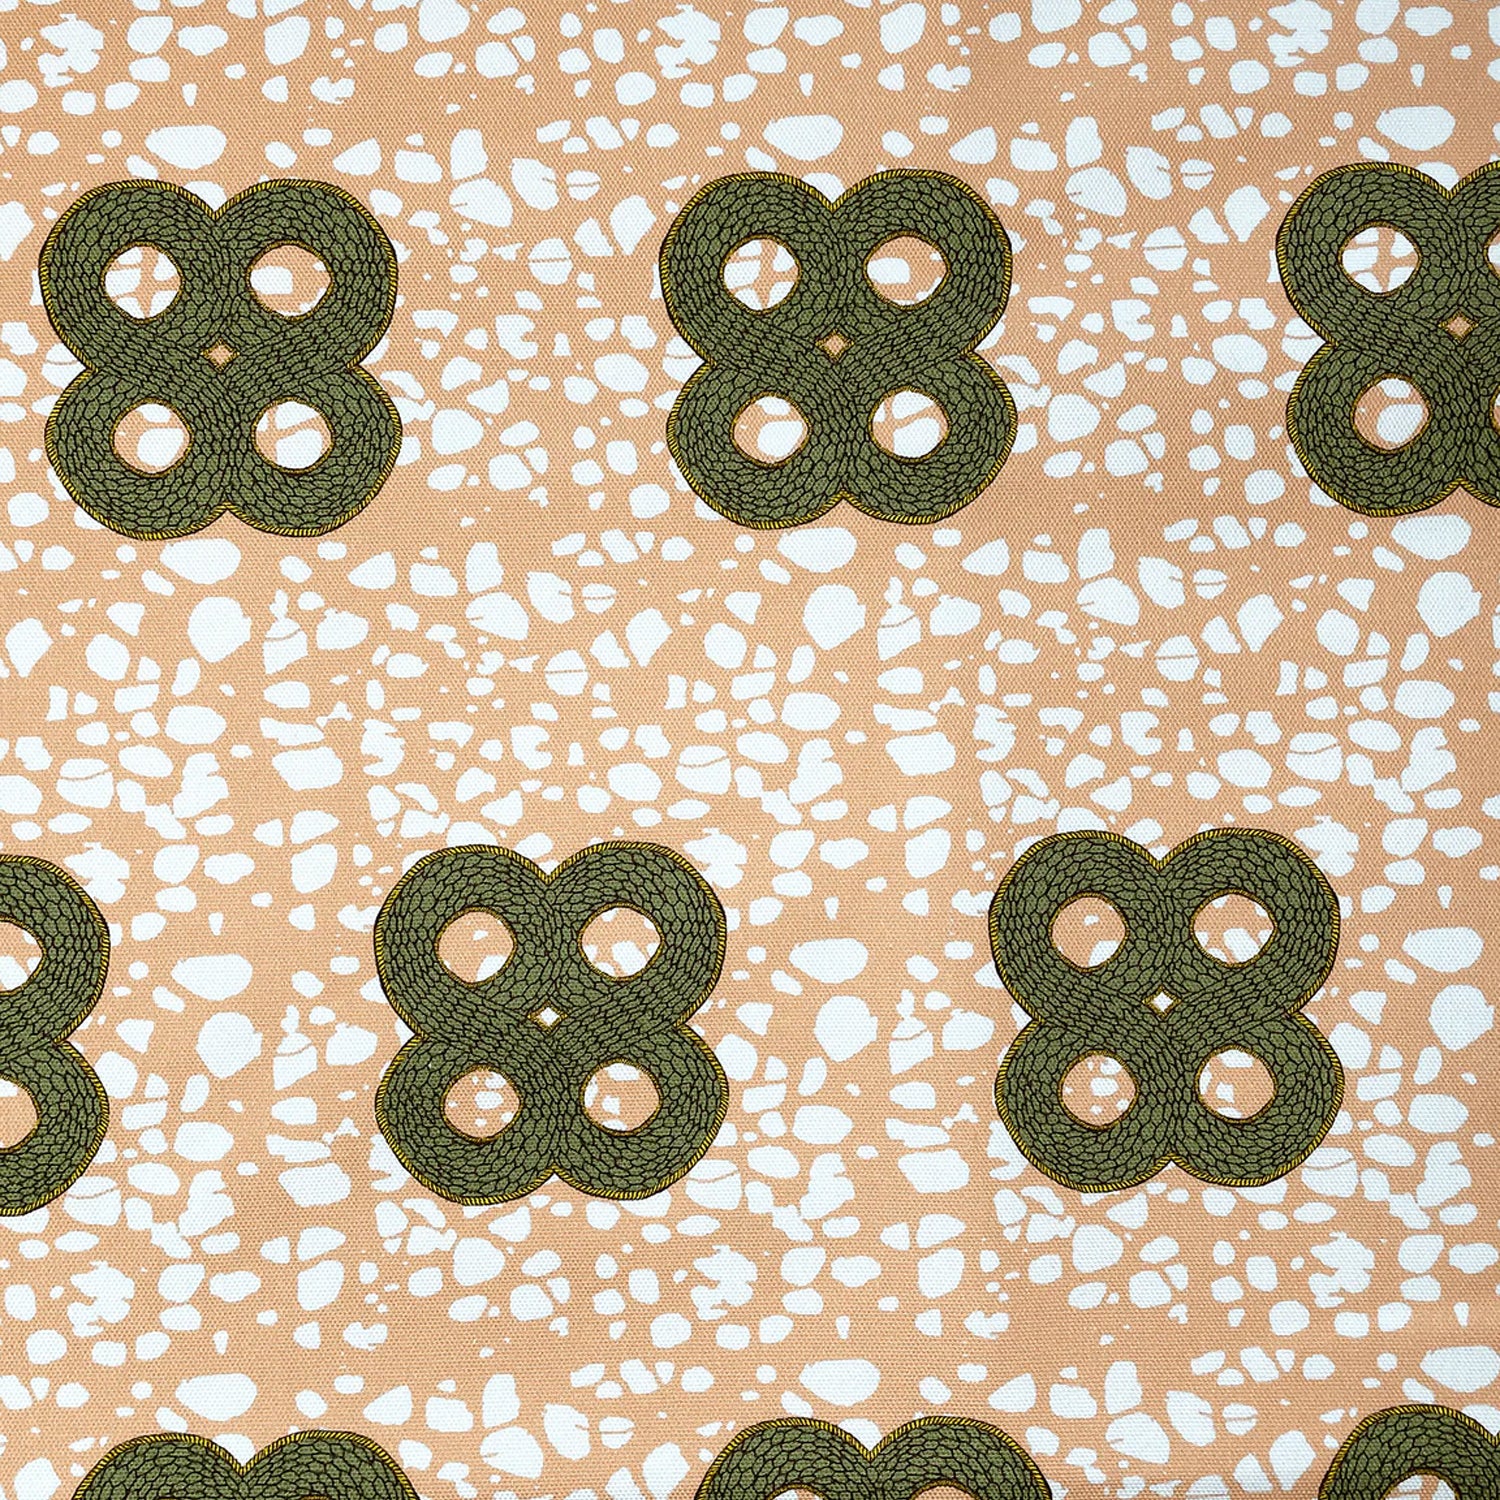 Detail of fabric in a curvilinear print in green and brown on a mottled coral field.